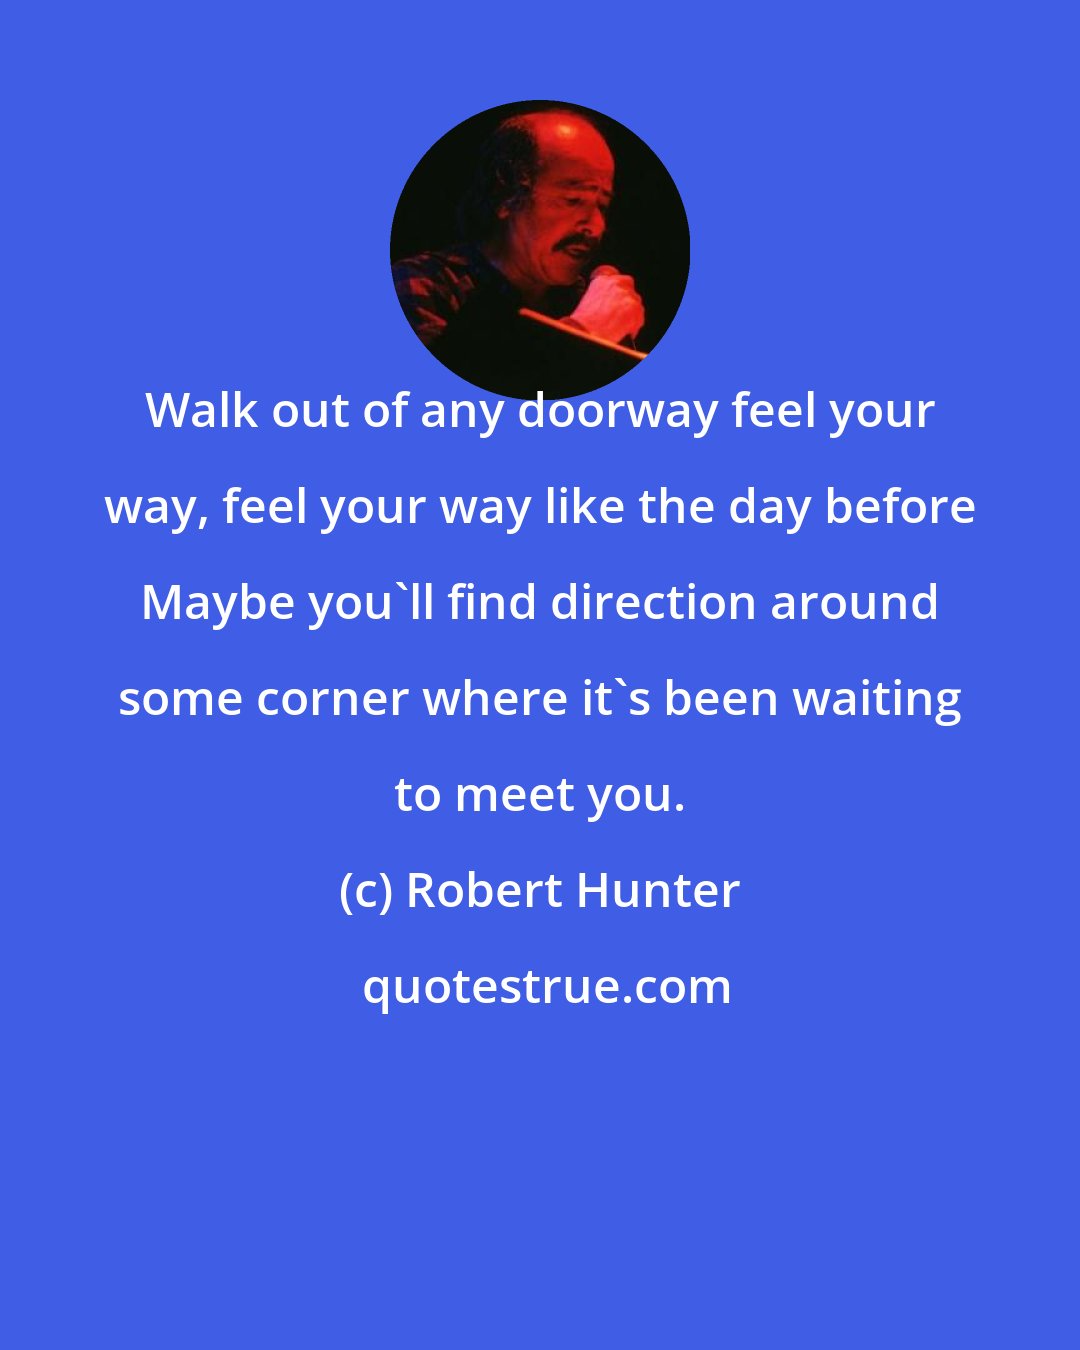 Robert Hunter: Walk out of any doorway feel your way, feel your way like the day before Maybe you'll find direction around some corner where it's been waiting to meet you.